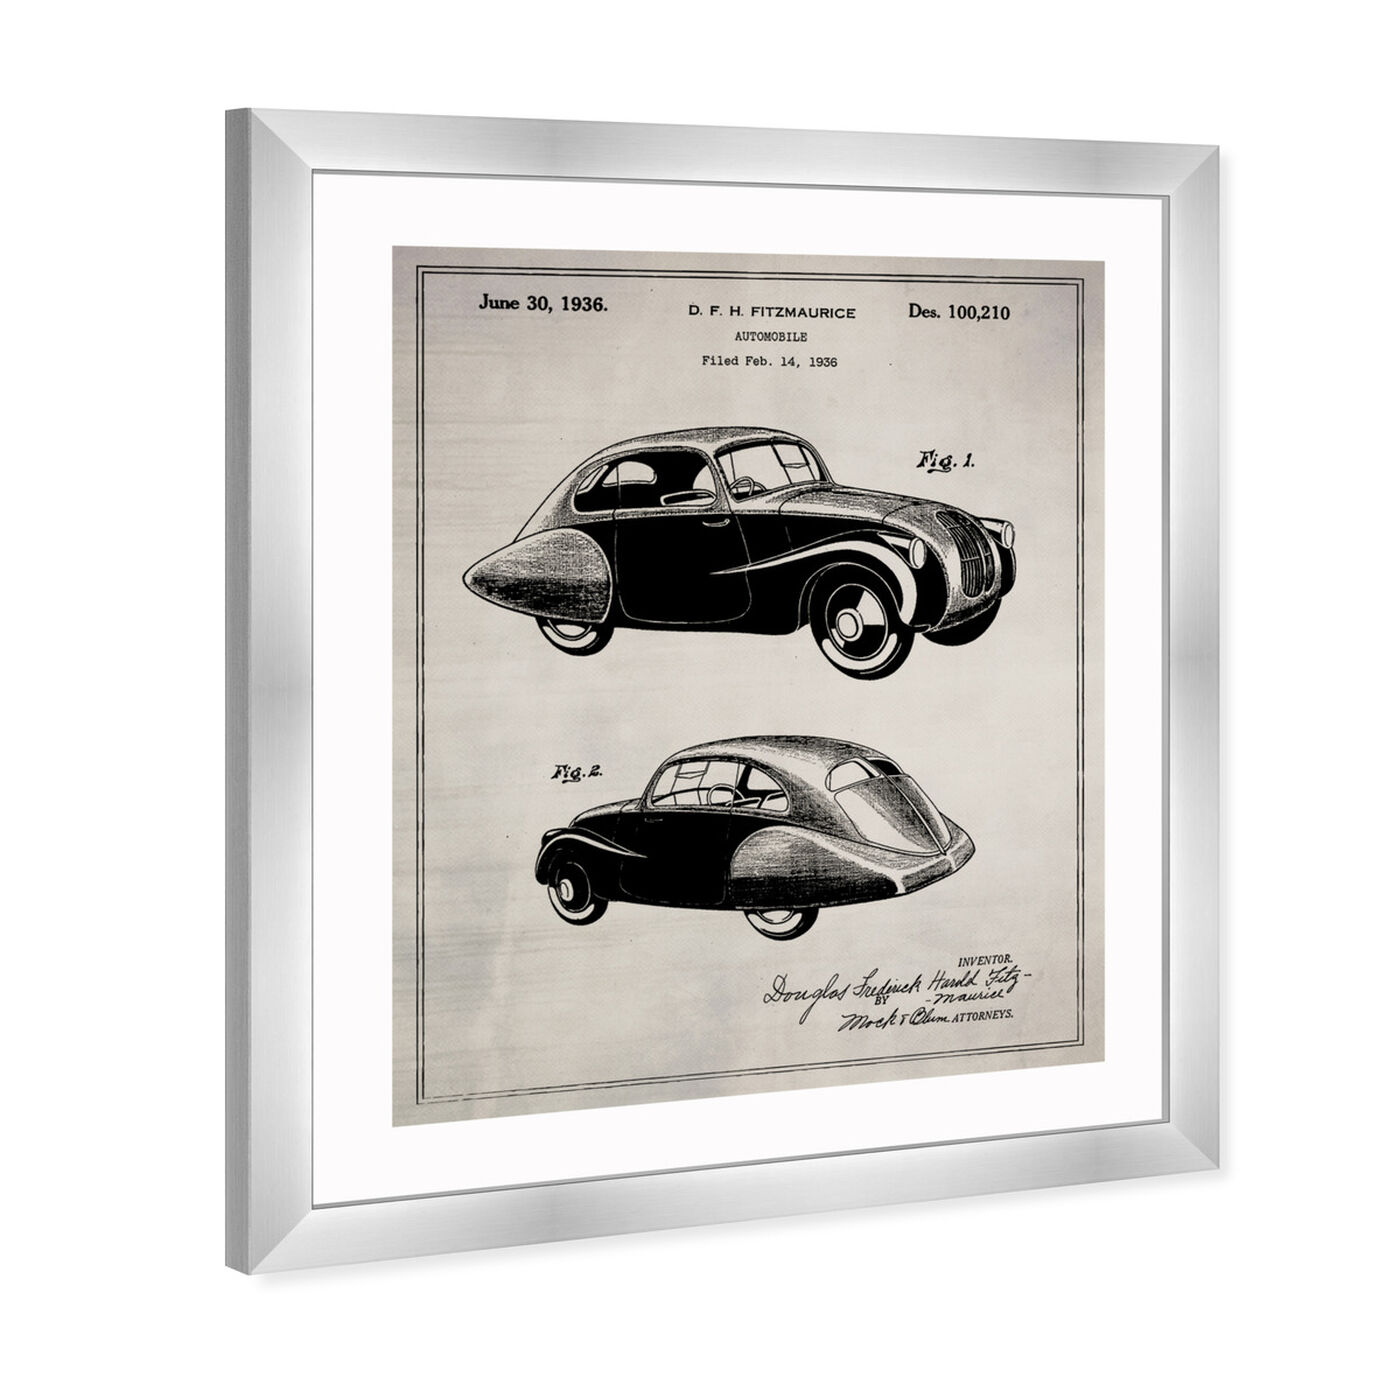 Angled view of Design For an Automobile 1936 featuring transportation and automobiles art.